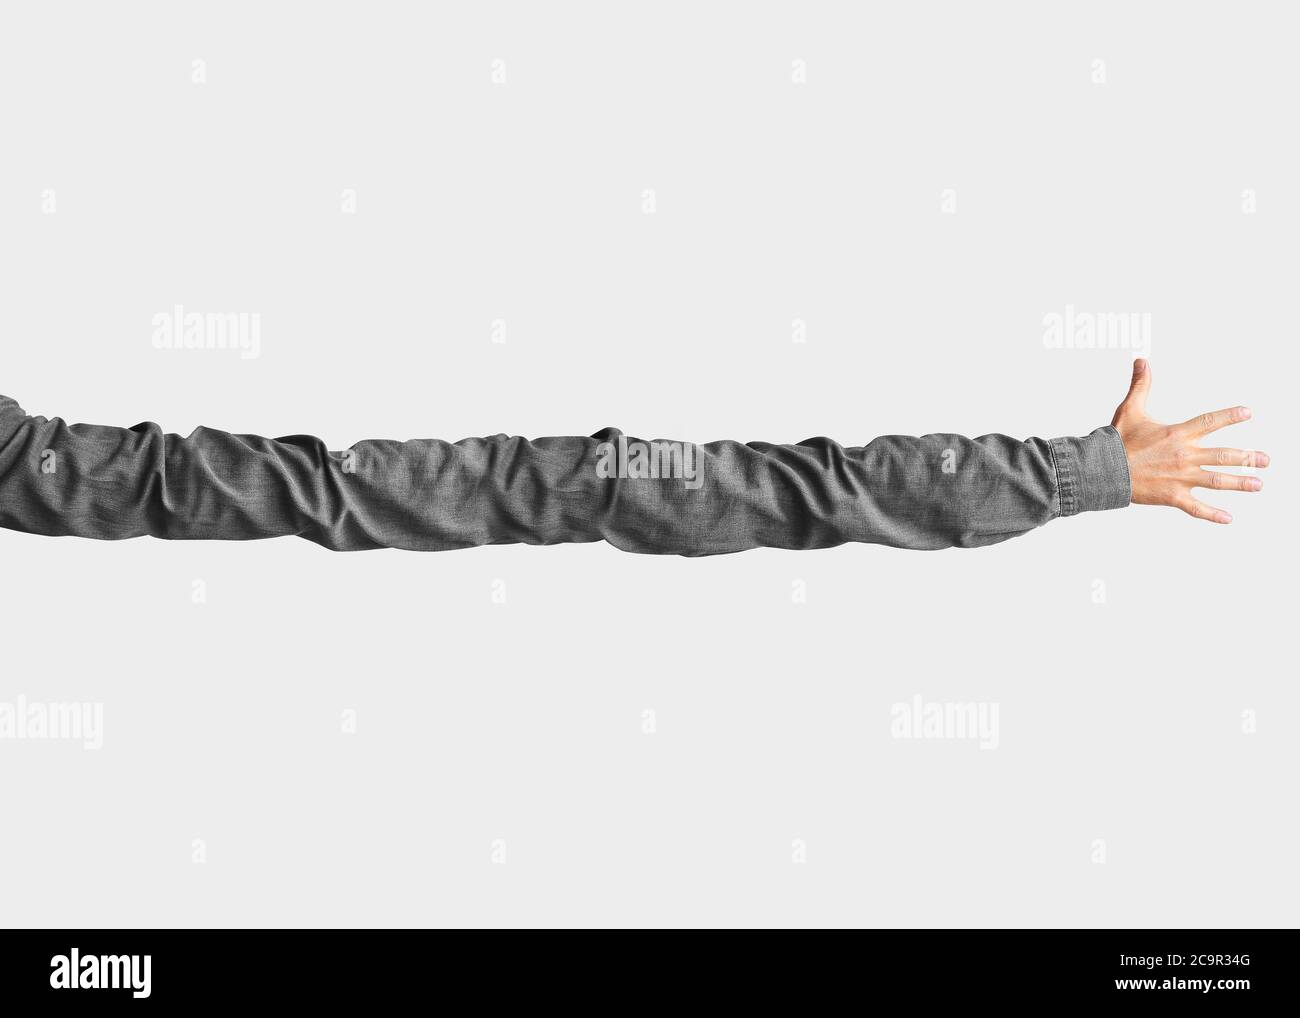 Very long arm reaching for something desirable Stock Photo - Alamy